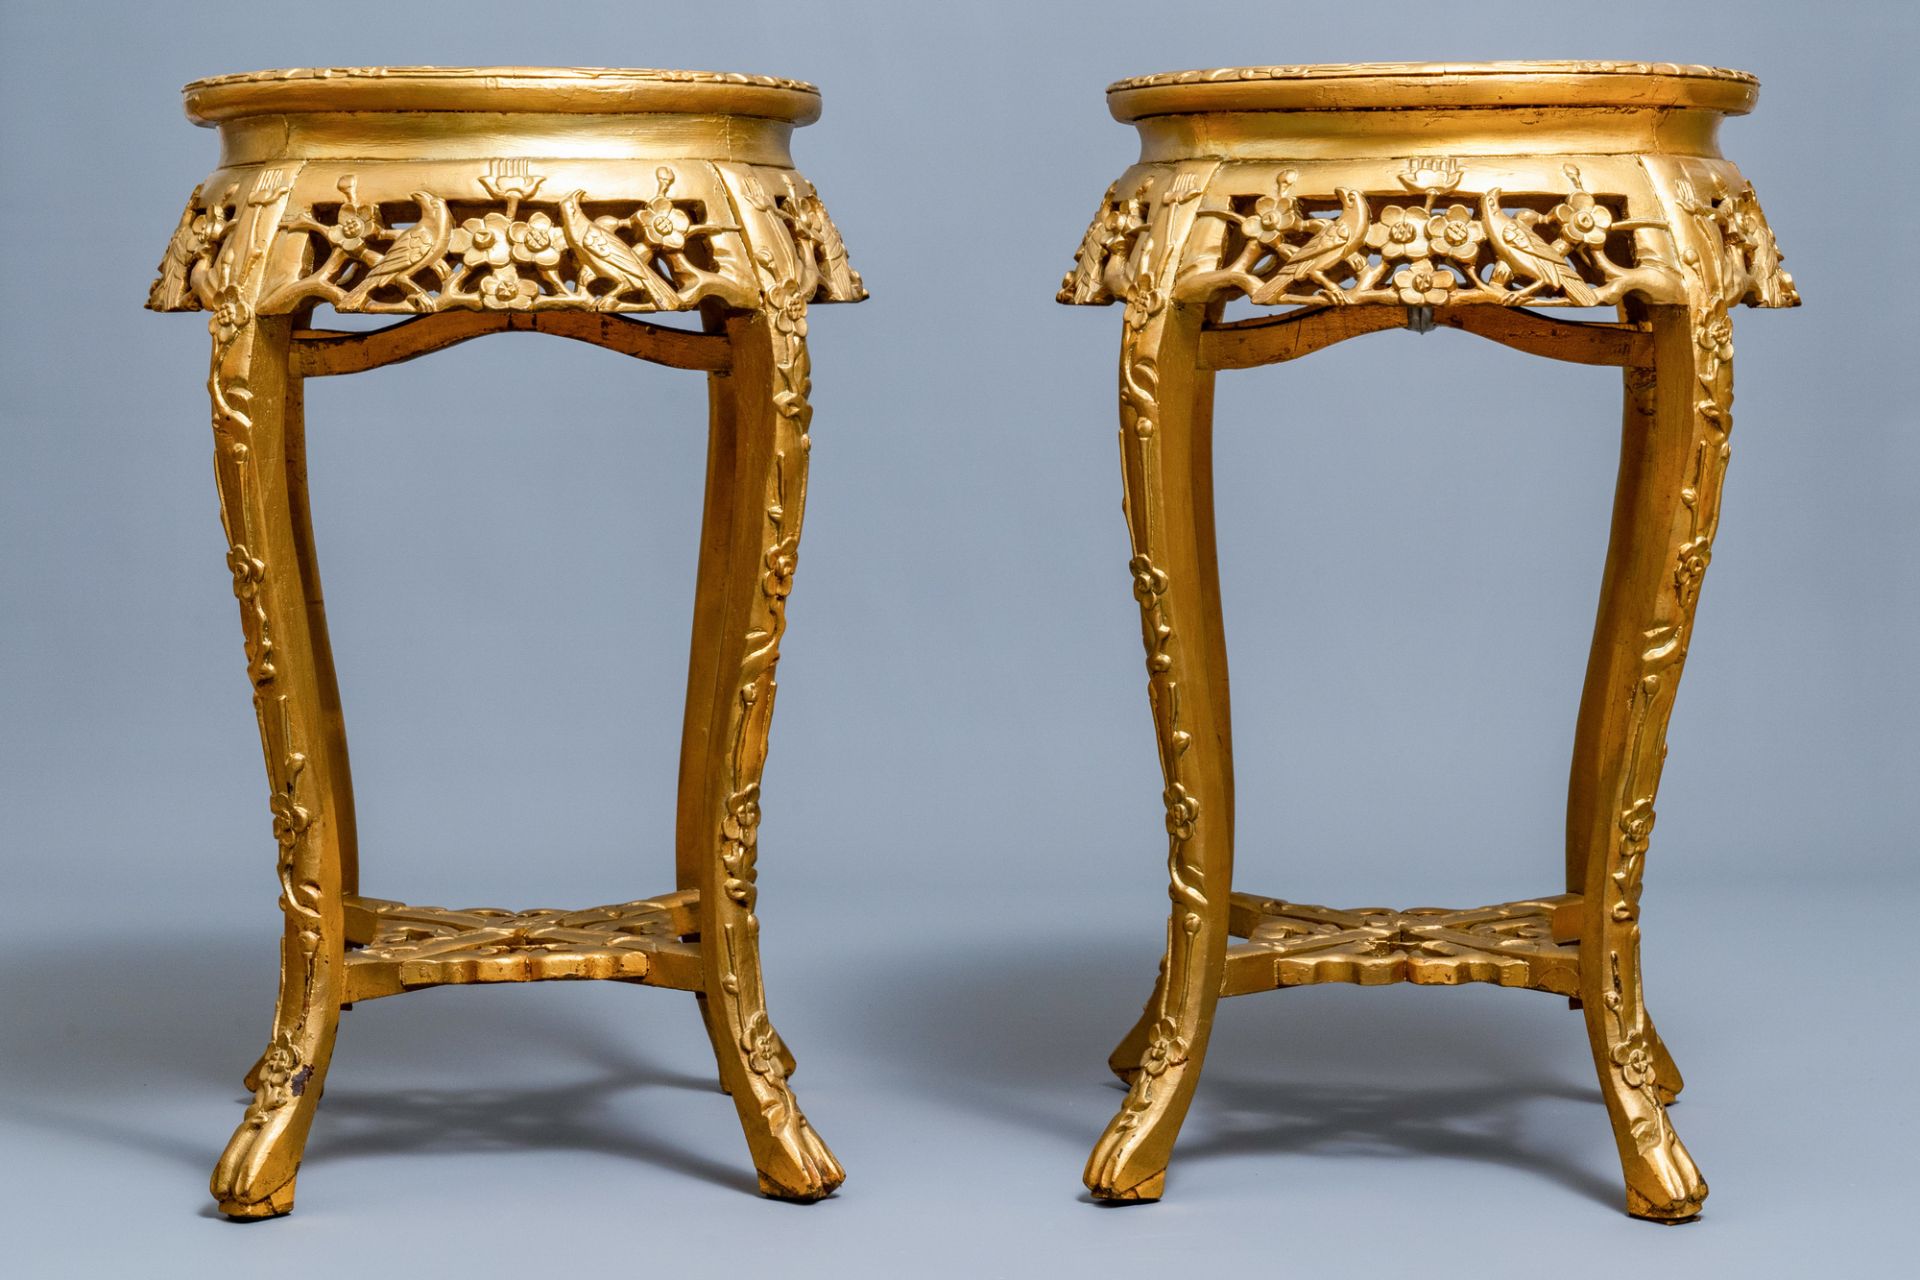 A pair of massive French Svres-style vases with gilded bronze mounts, signed Desprez, 19th C. - Image 20 of 56